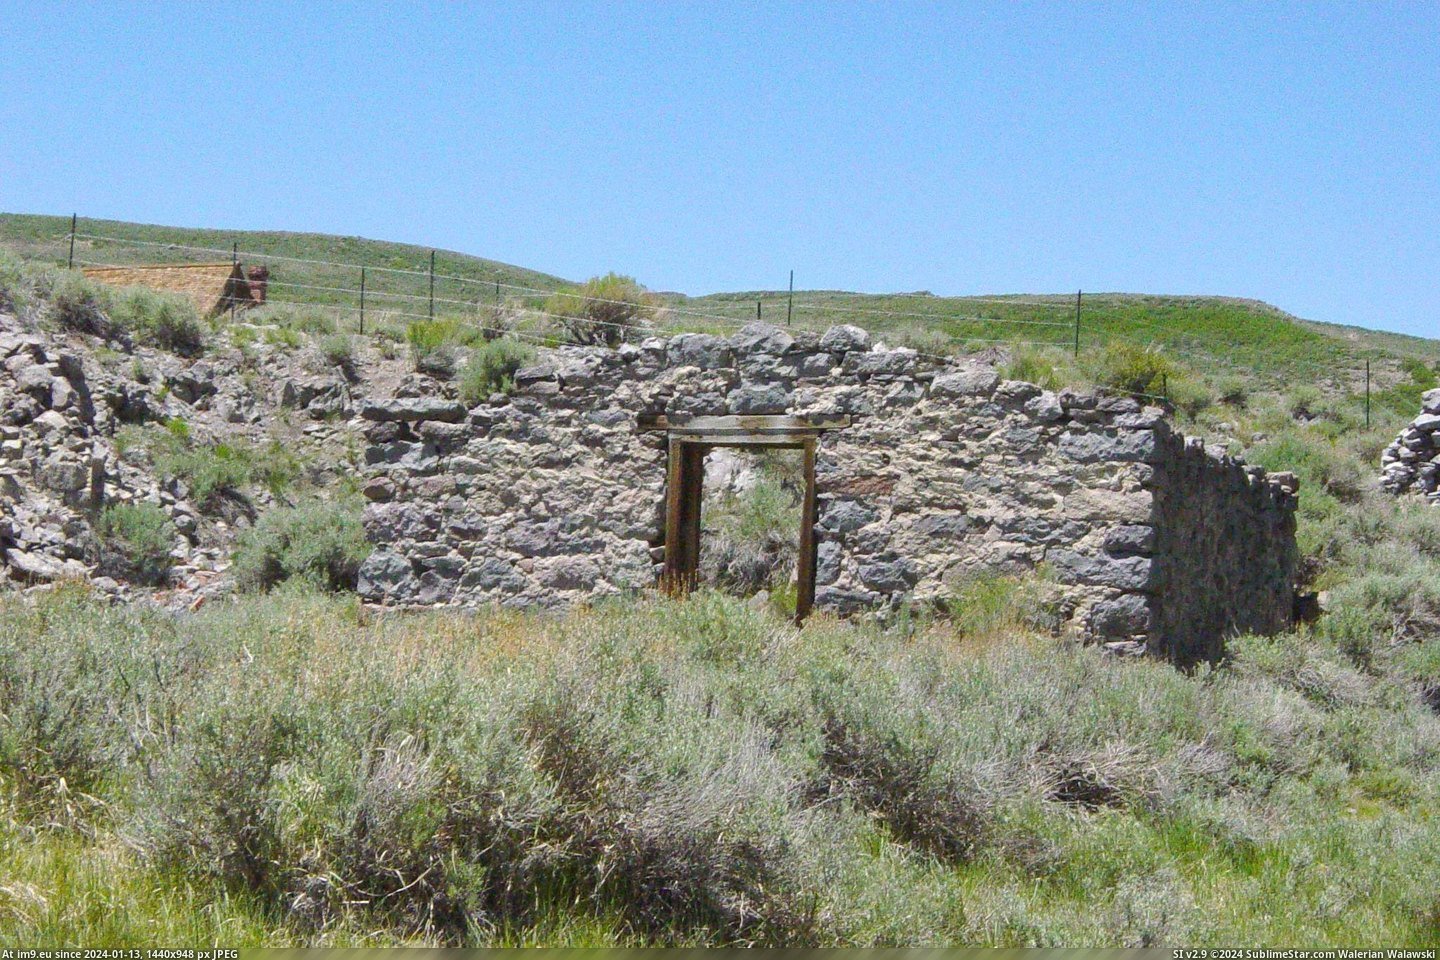 #California #Ruins #Moyle #Bodie #Warehouse Moyle Warehouse Ruins In Bodie, California Pic. (Obraz z album Bodie - a ghost town in Eastern California))